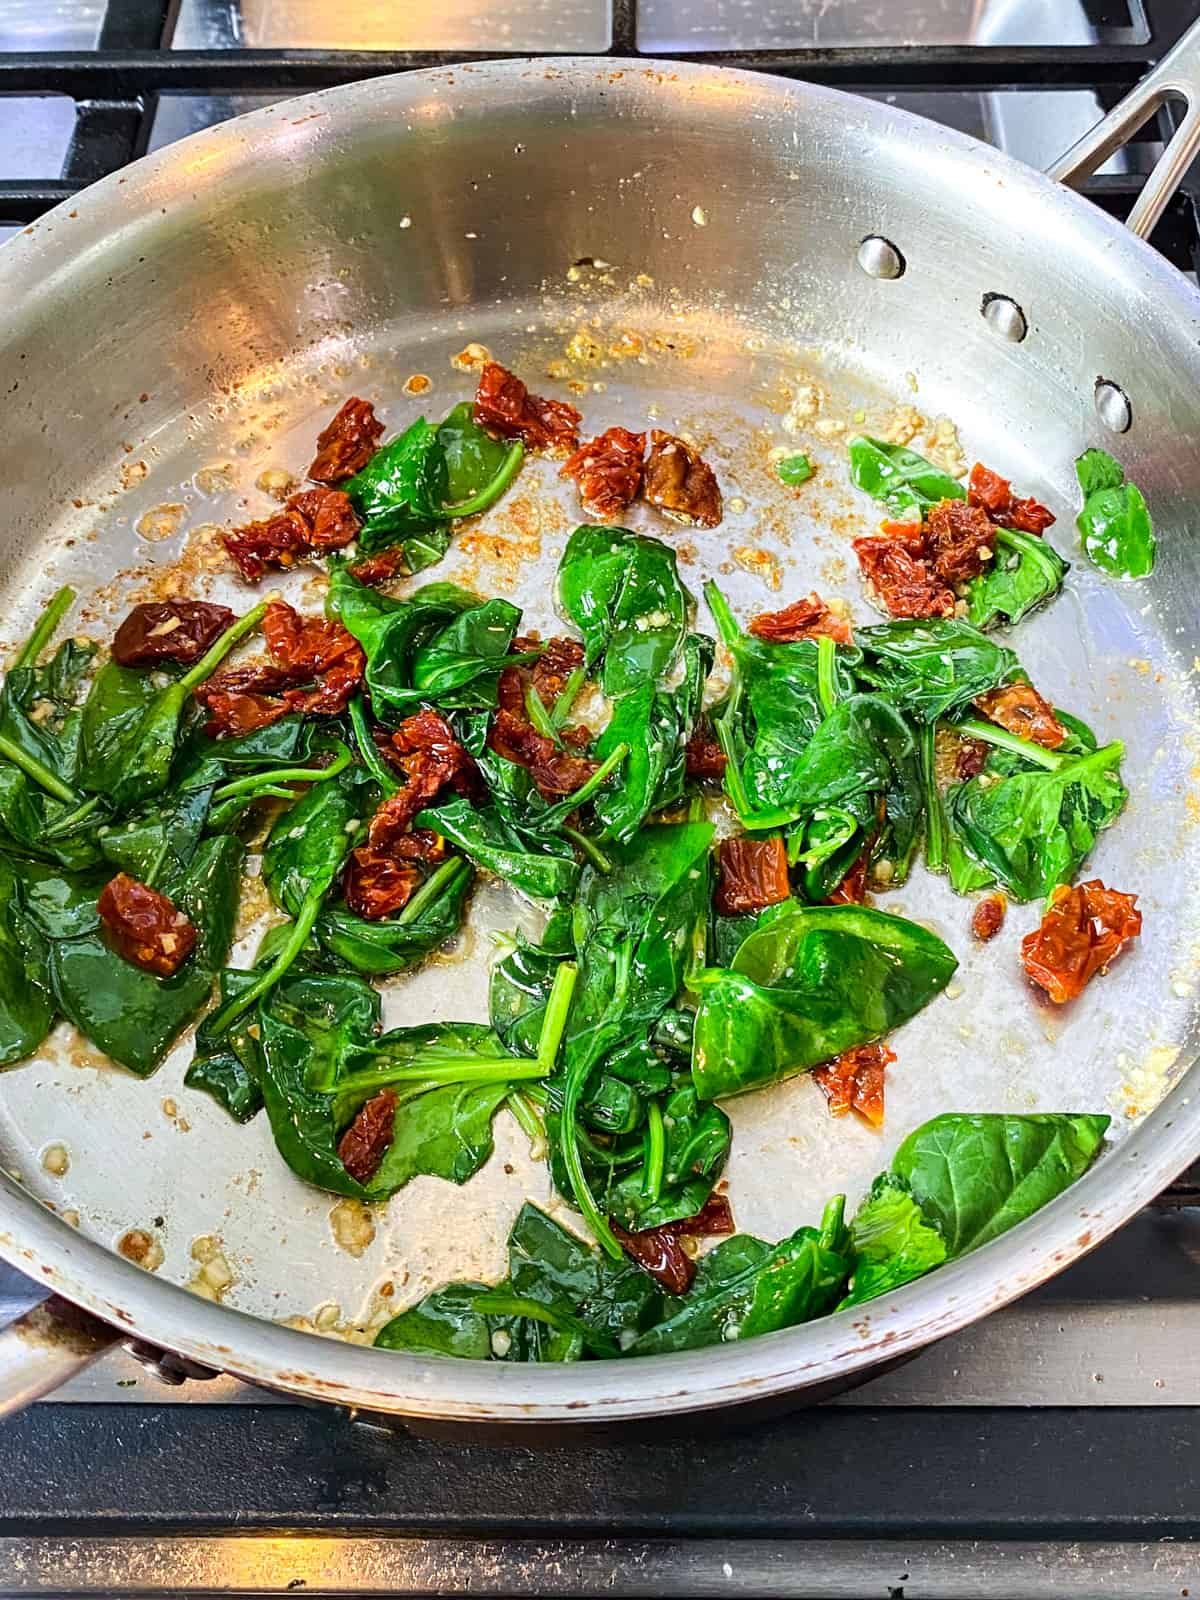 Add the fresh spinach and saute with the sun dried tomatoes.